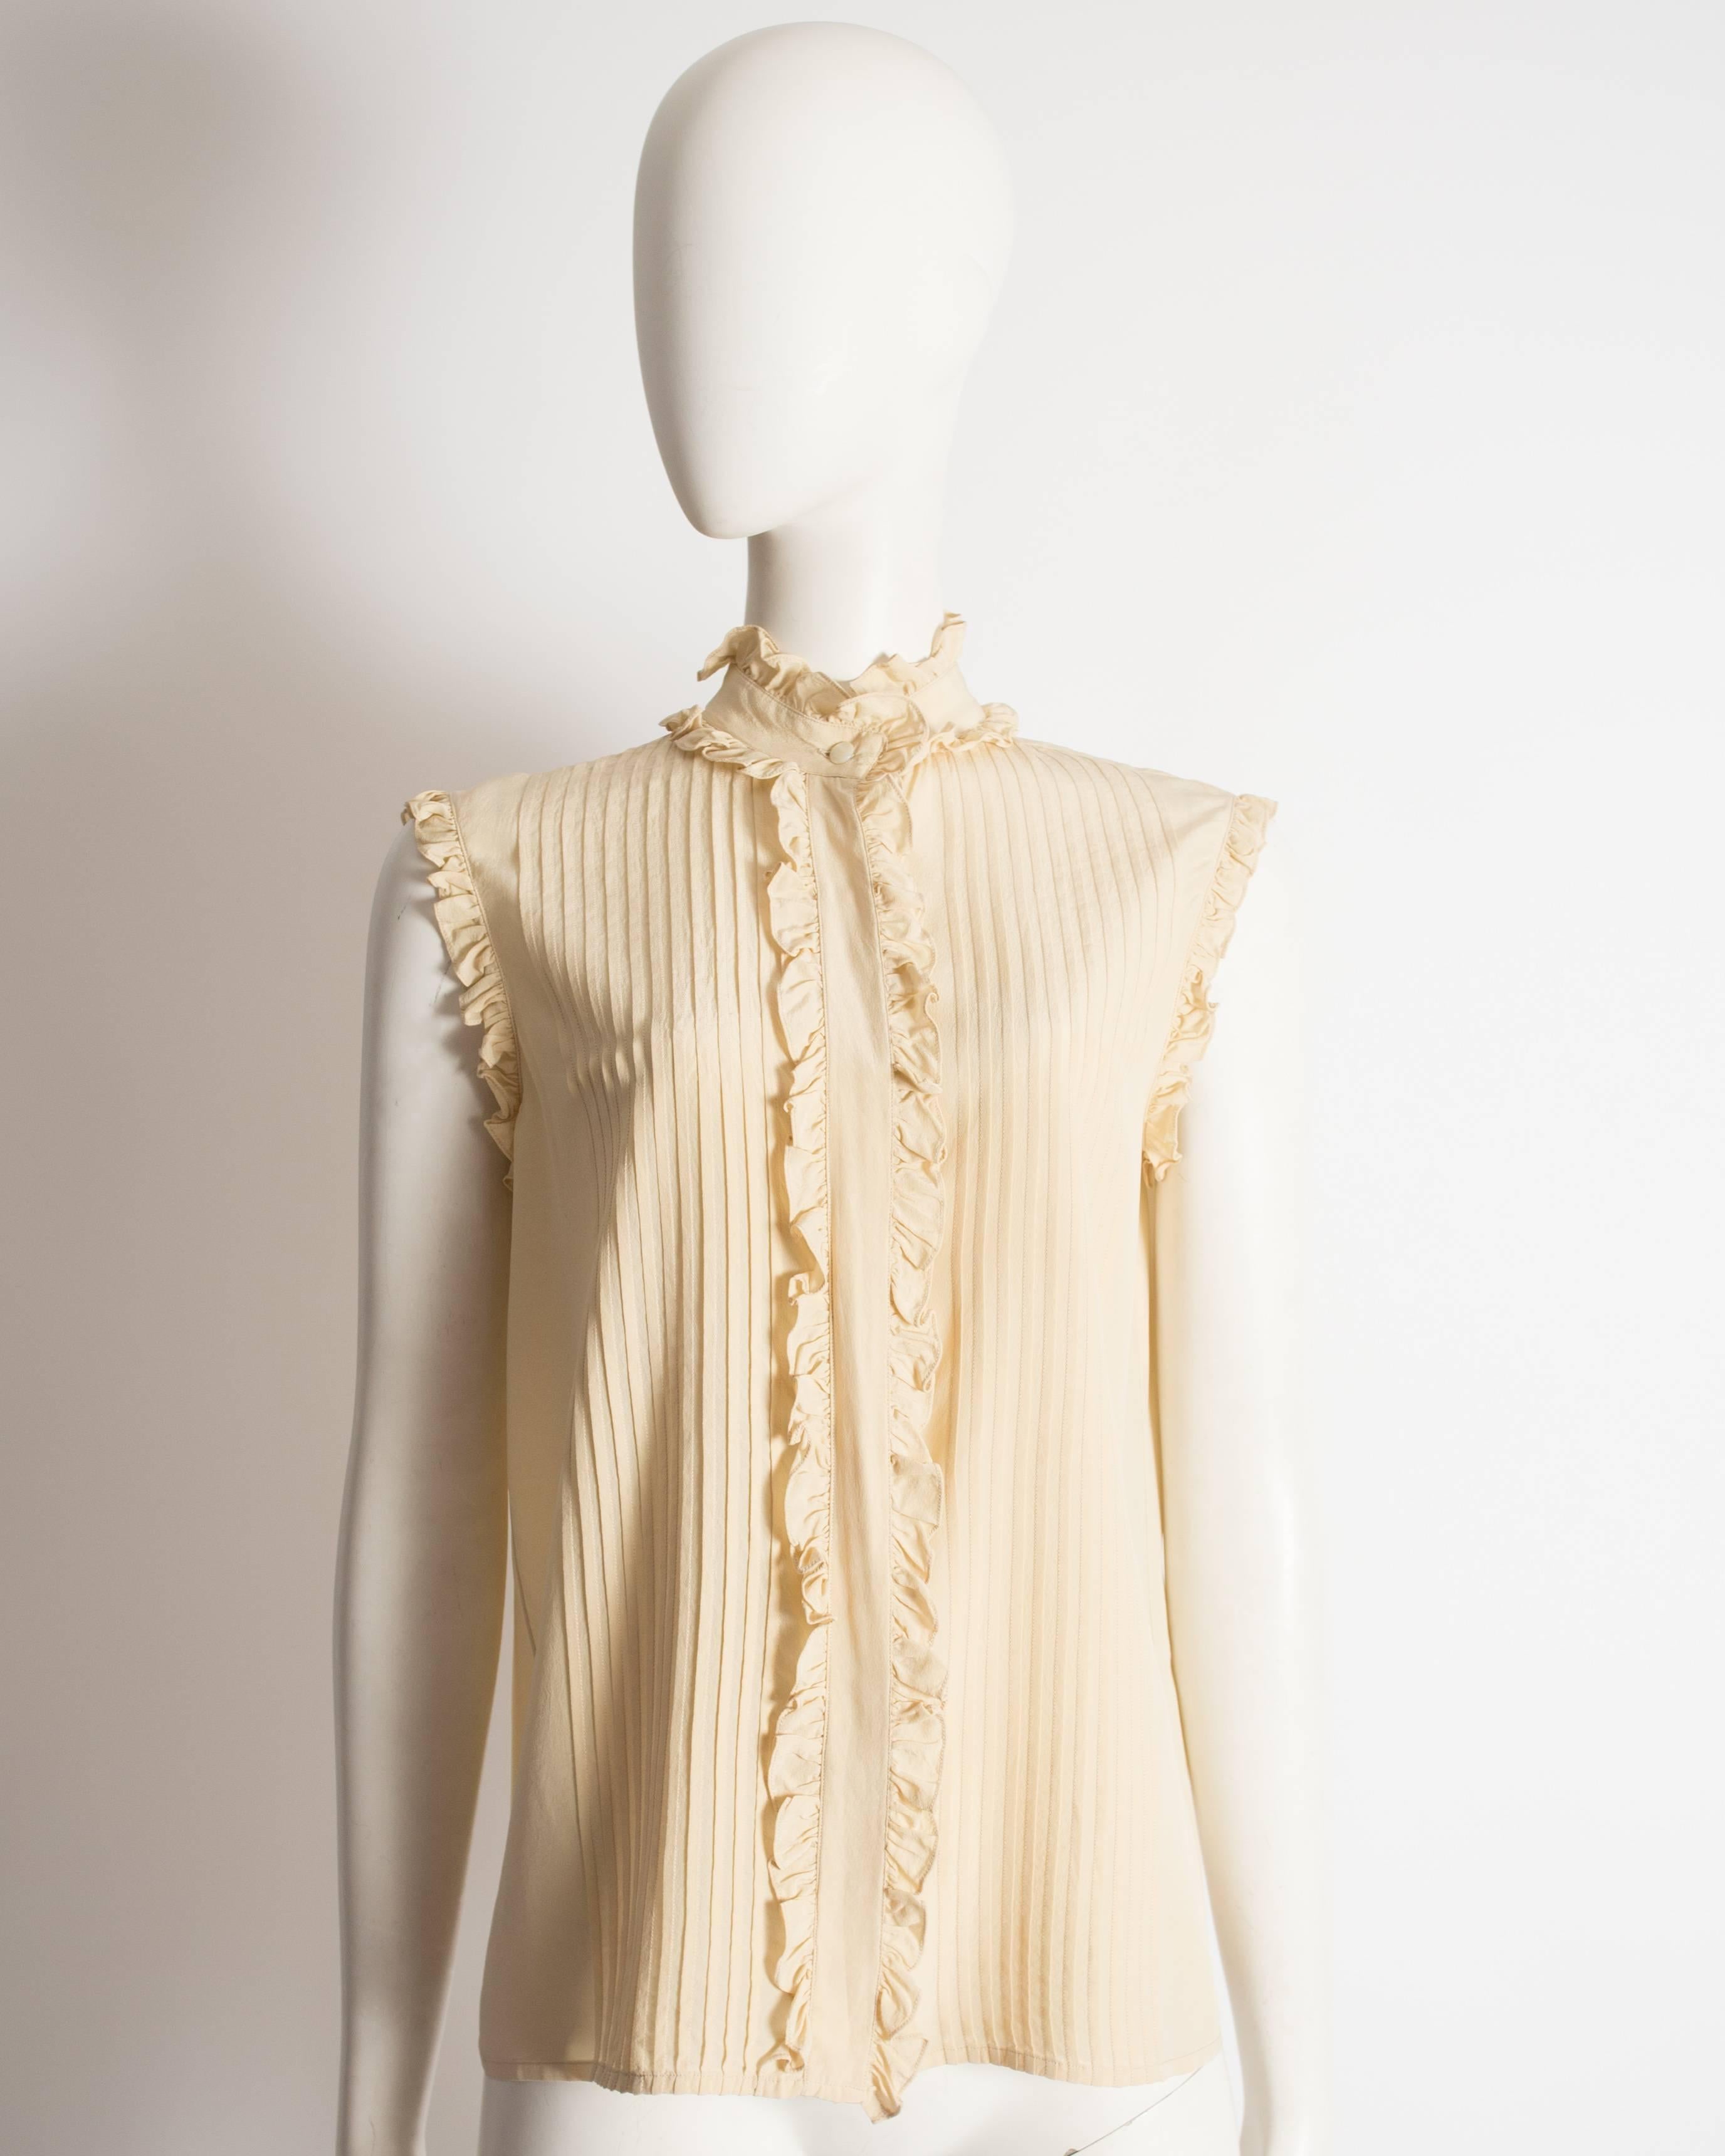 Chanel pintuck blouse constructed in ivory silk with ruffled trim and hidden button closures. 

Circa 1970s